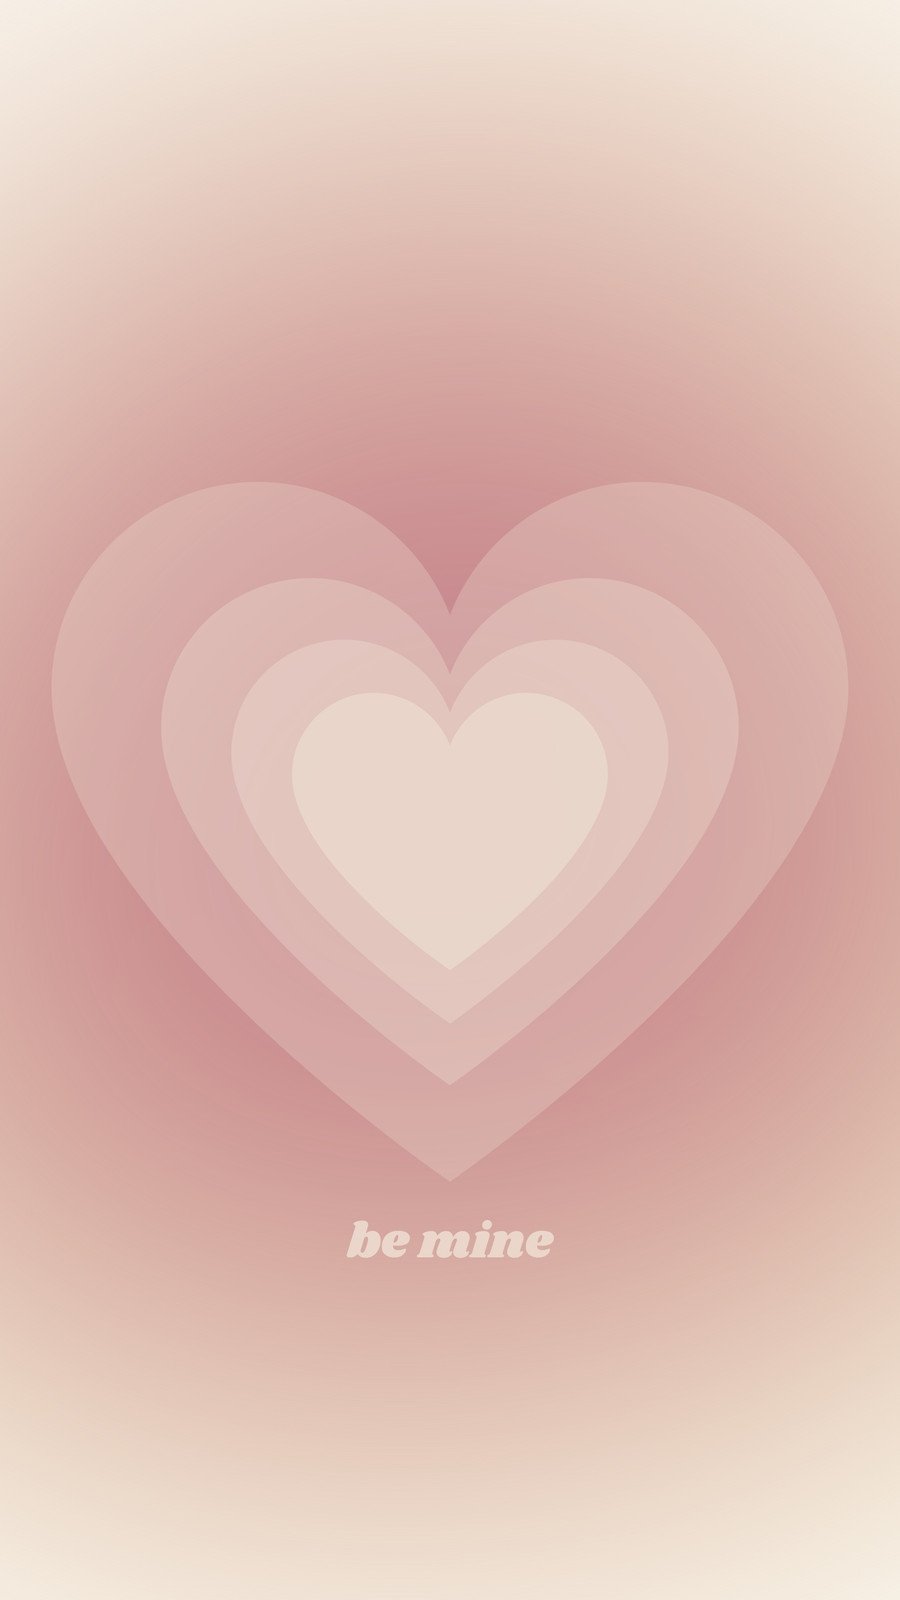 Page 2 - Free and customizable heart templates